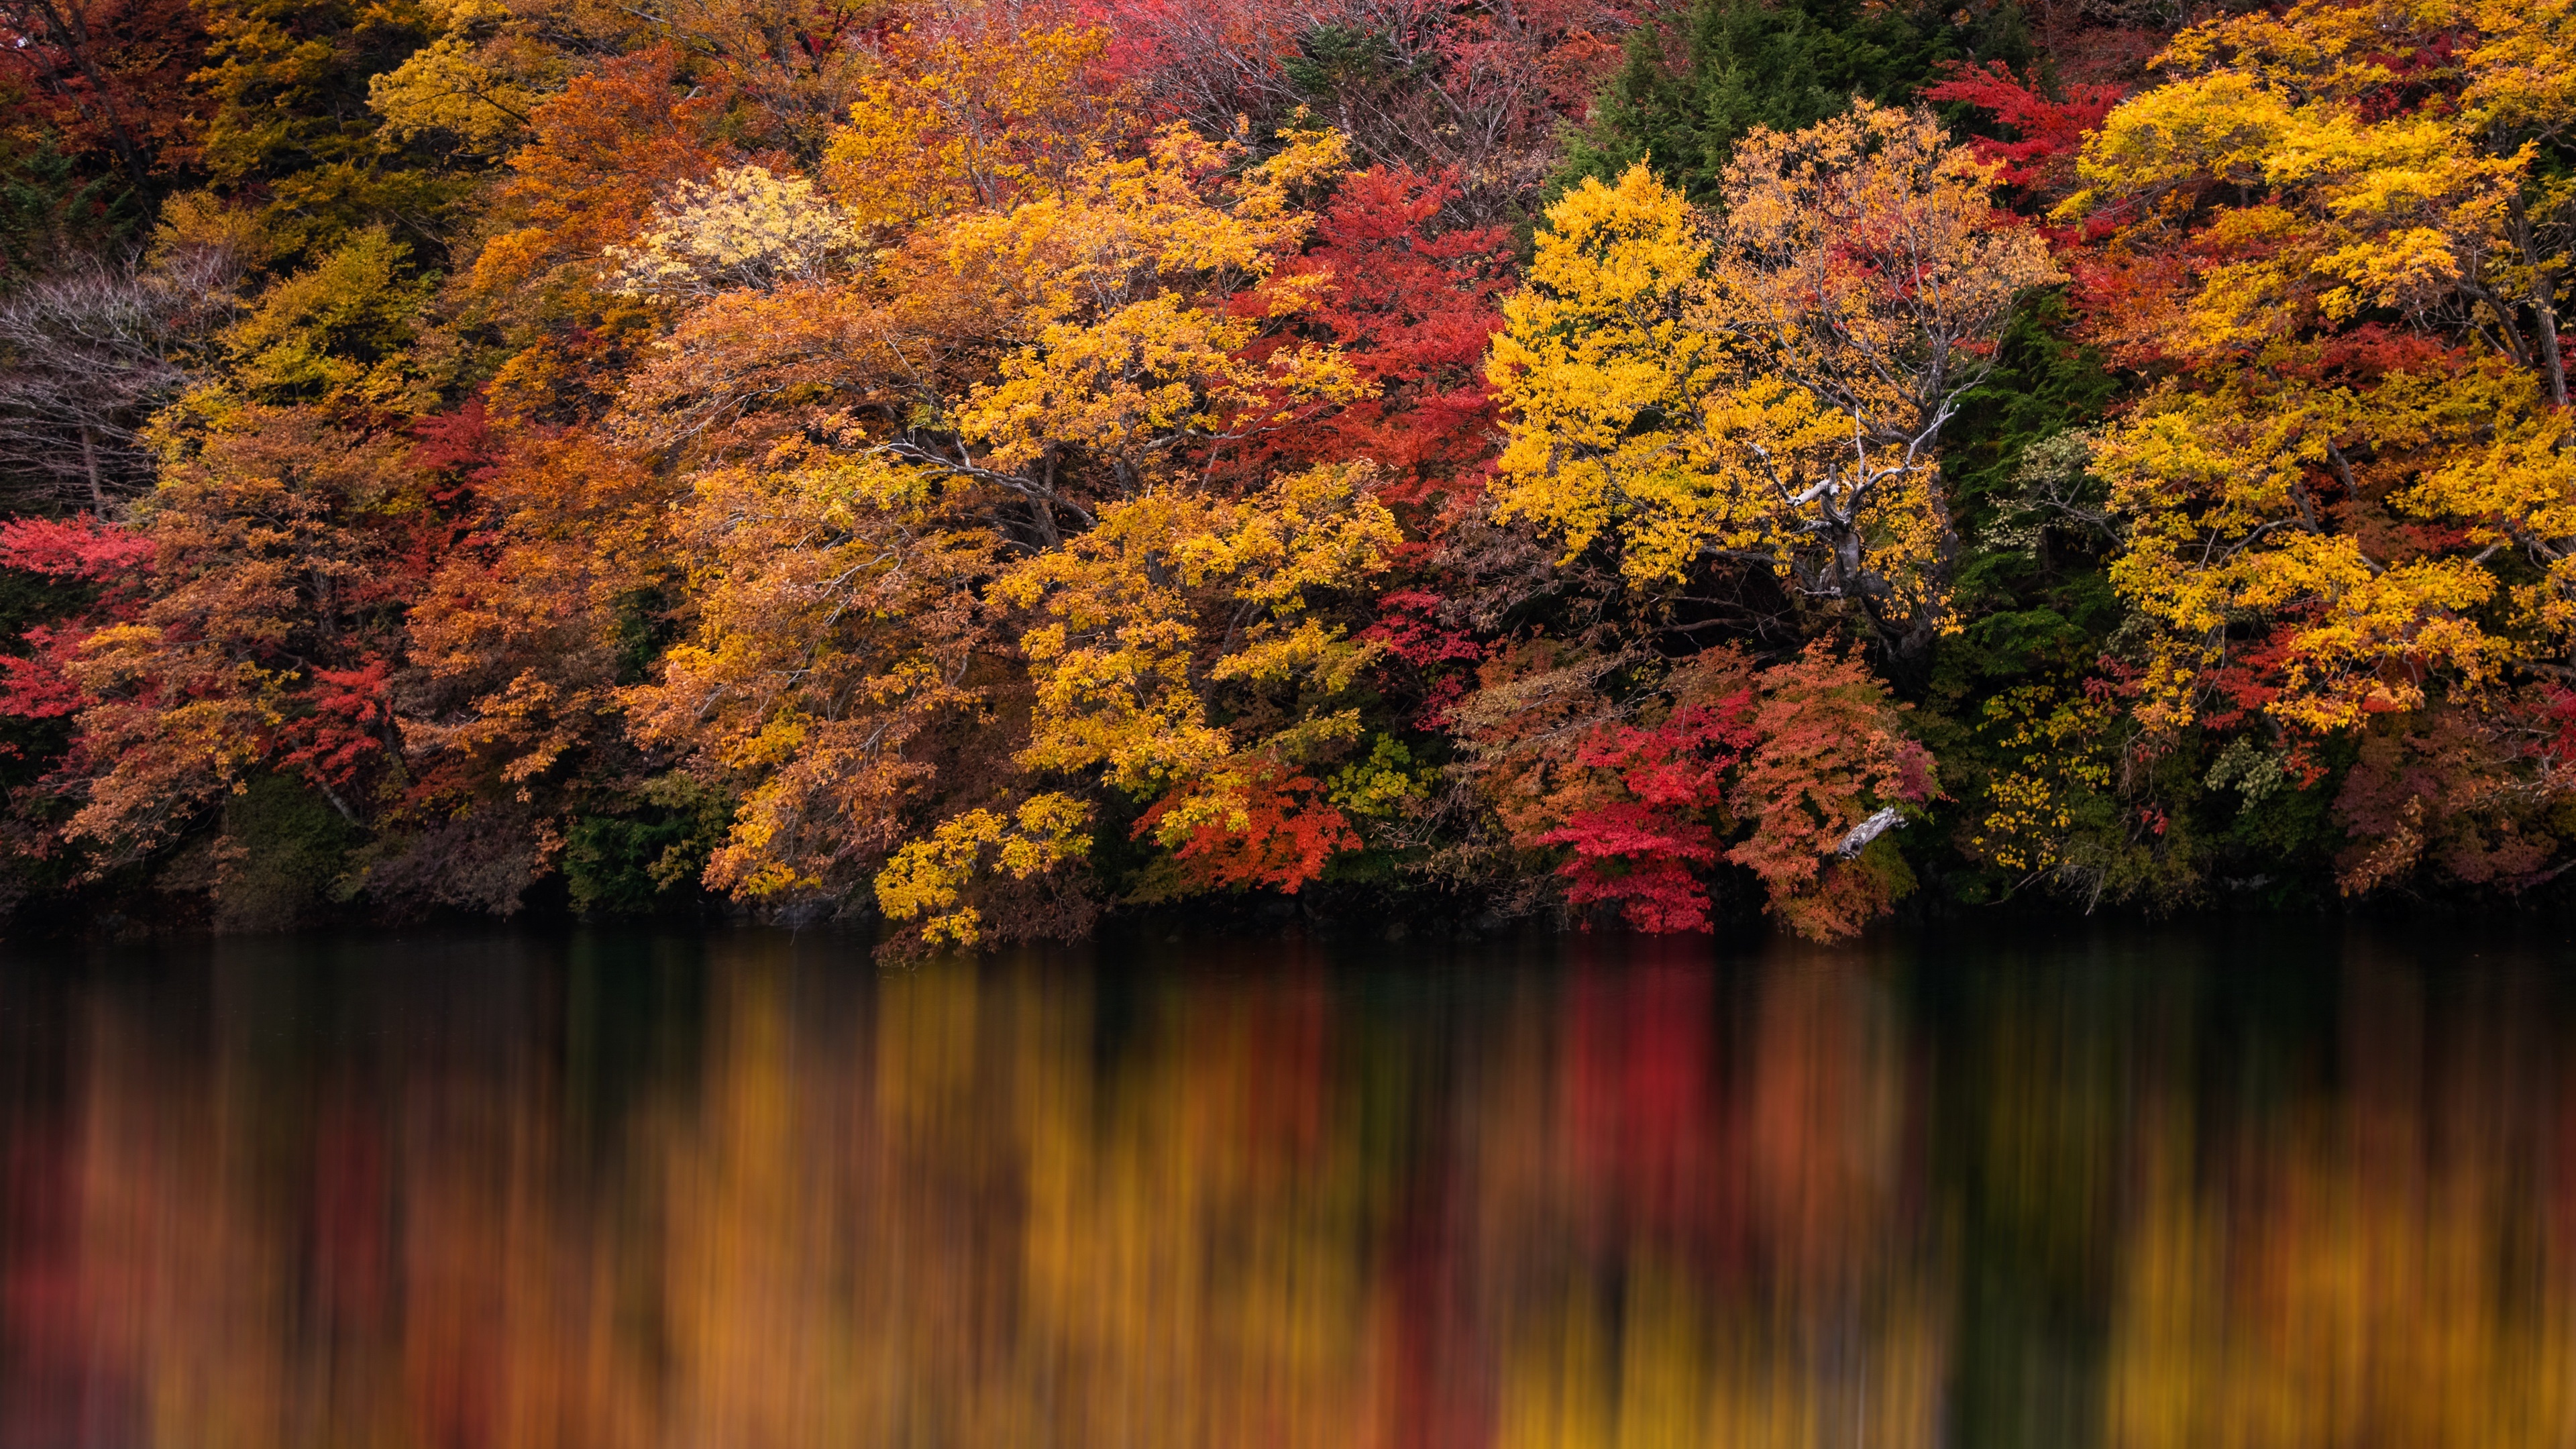 4K Fall wallpapers, Background variety, Autumn spectacle, Visual experience, Nature showcase, 3840x2160 4K Desktop